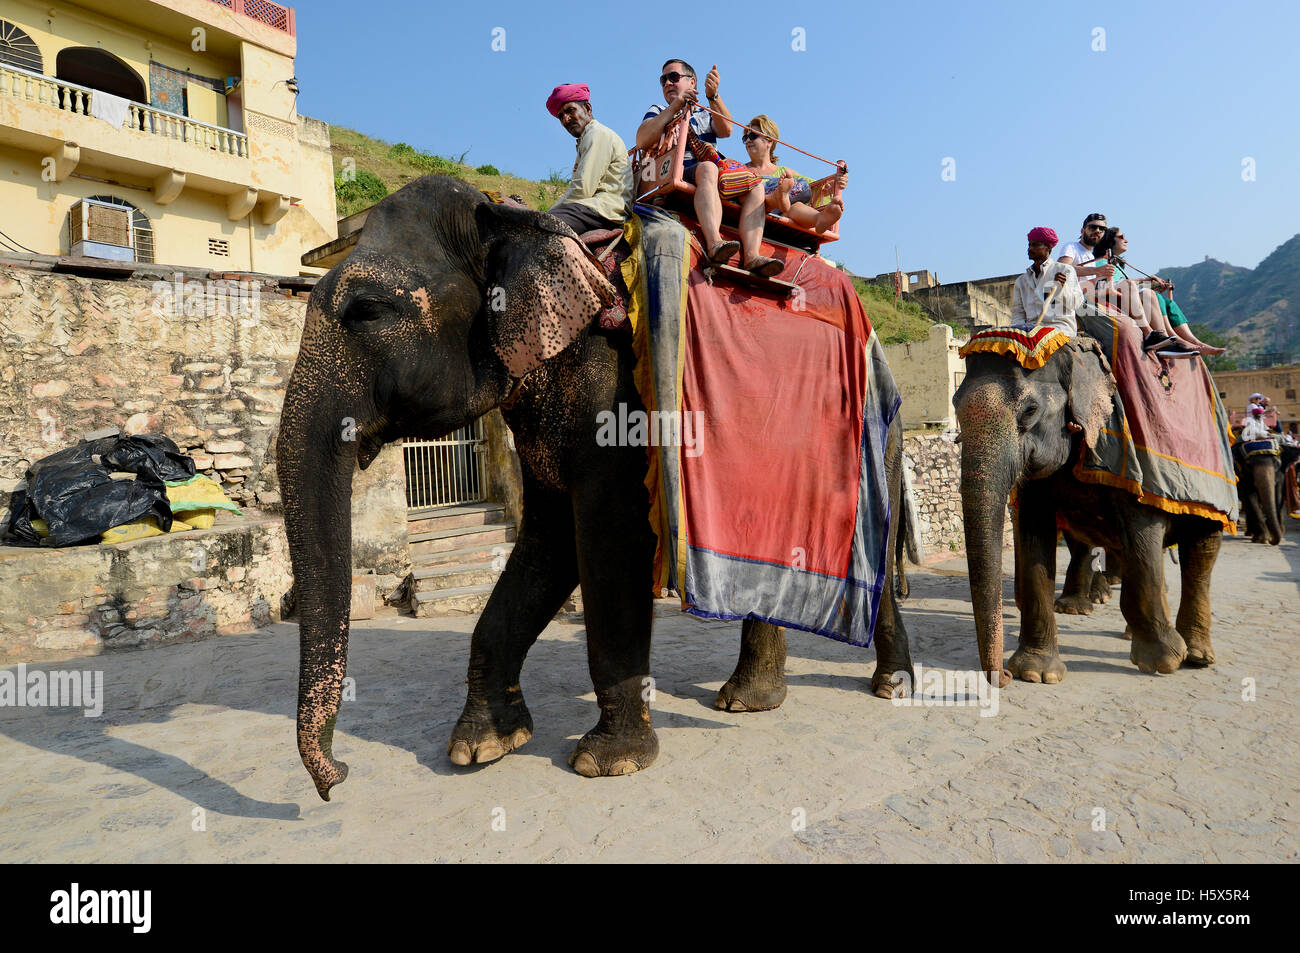 Decorated Elephant with their rider carrying passenger at Amer fort in Jaipur,Rajasthan,India Stock Photo